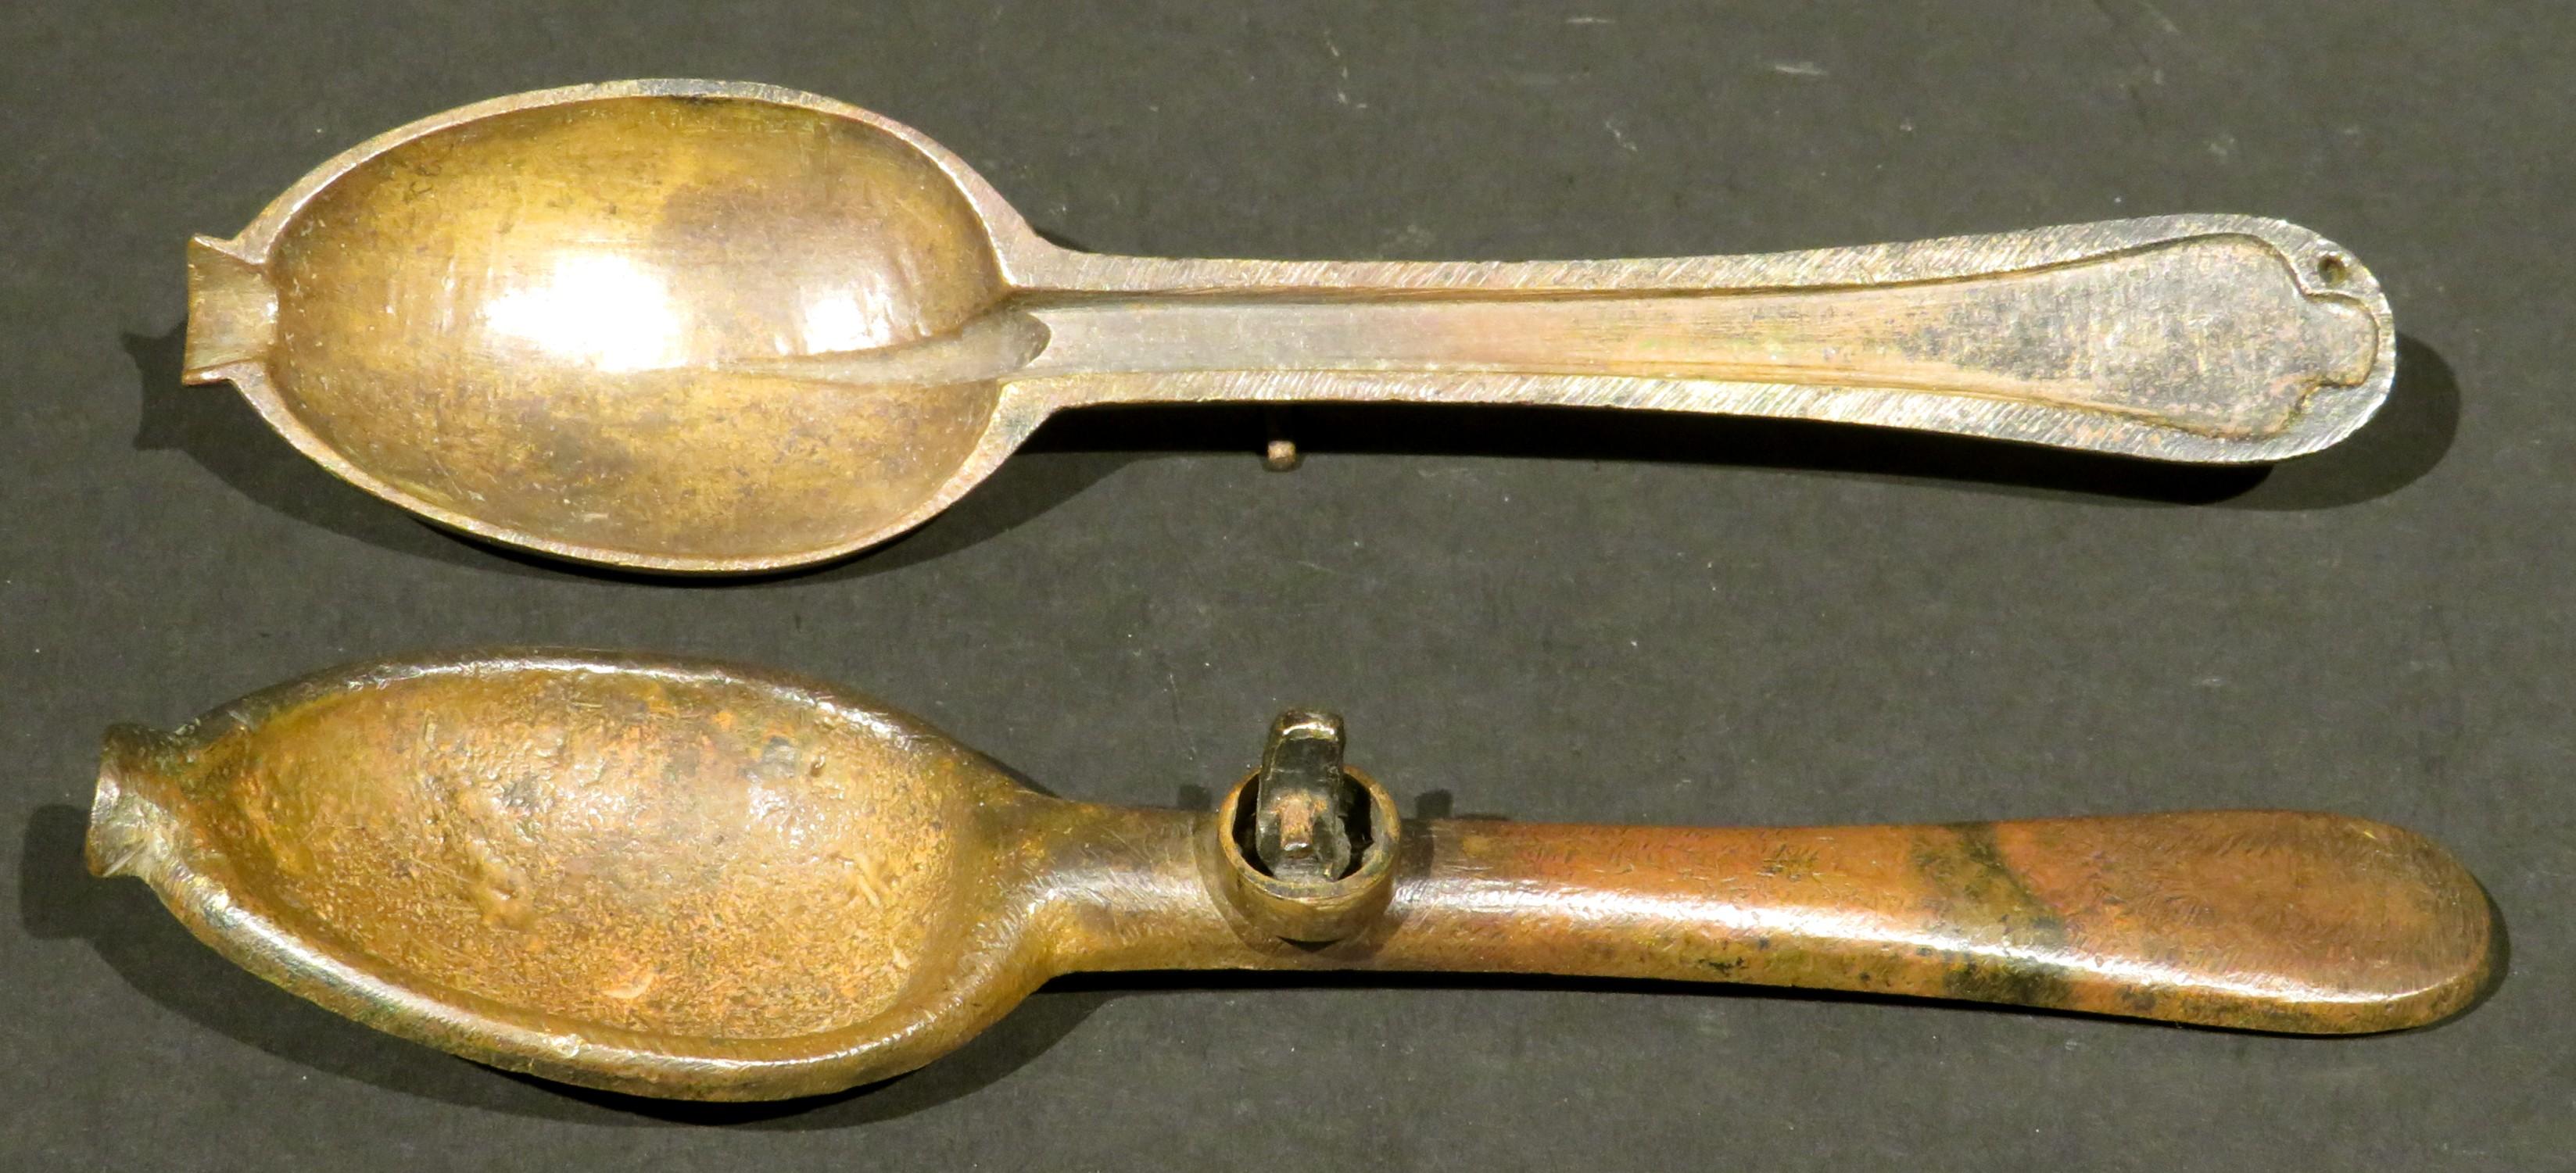 An early 18th century bronze spoon mould comprised of 2 halves that form a spoon mould for a Hanoverian 'rat-tail' dog nose tablespoon. Both halves exhibiting a very old untouched surface & patina both inside and out. 
Spoon moulds were originally